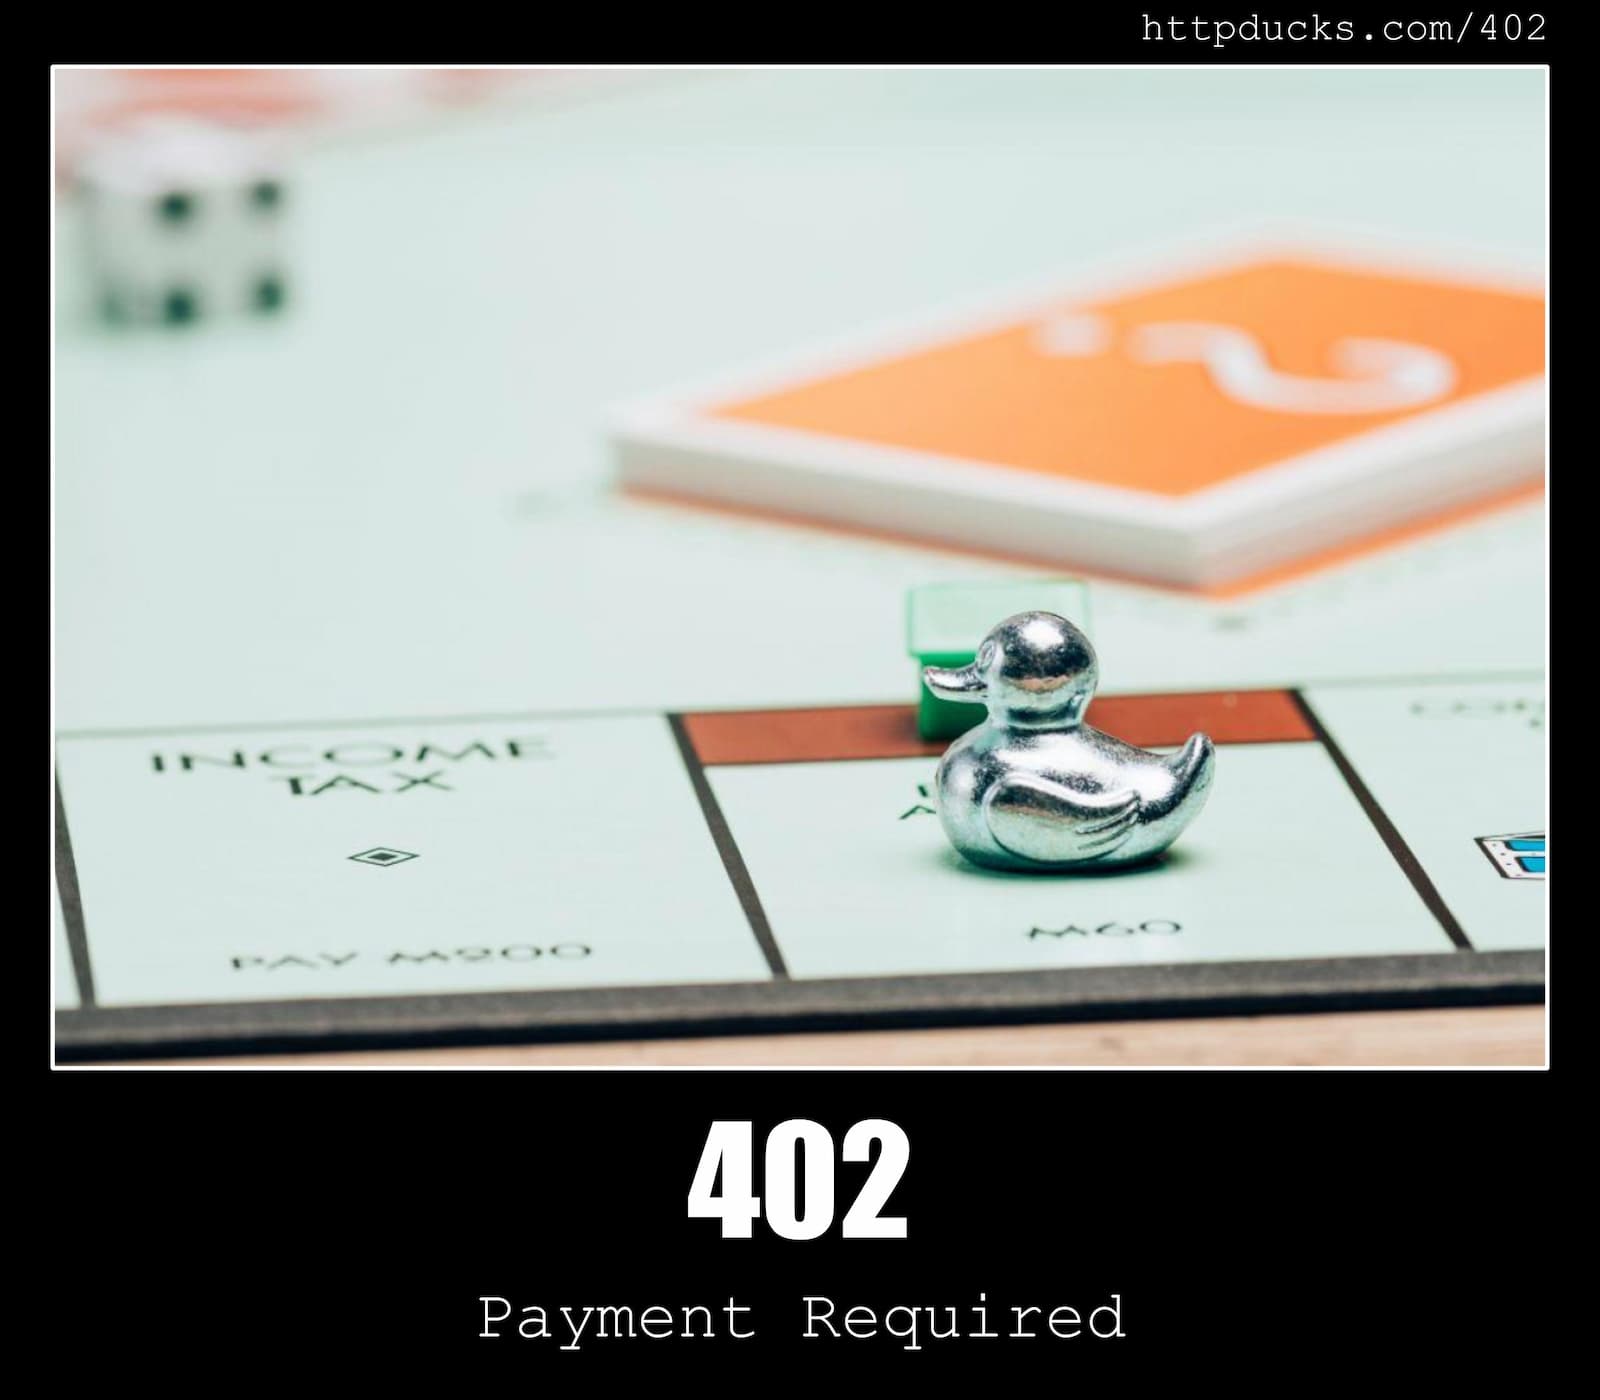 HTTP Status Code 402 Payment Required & Ducks